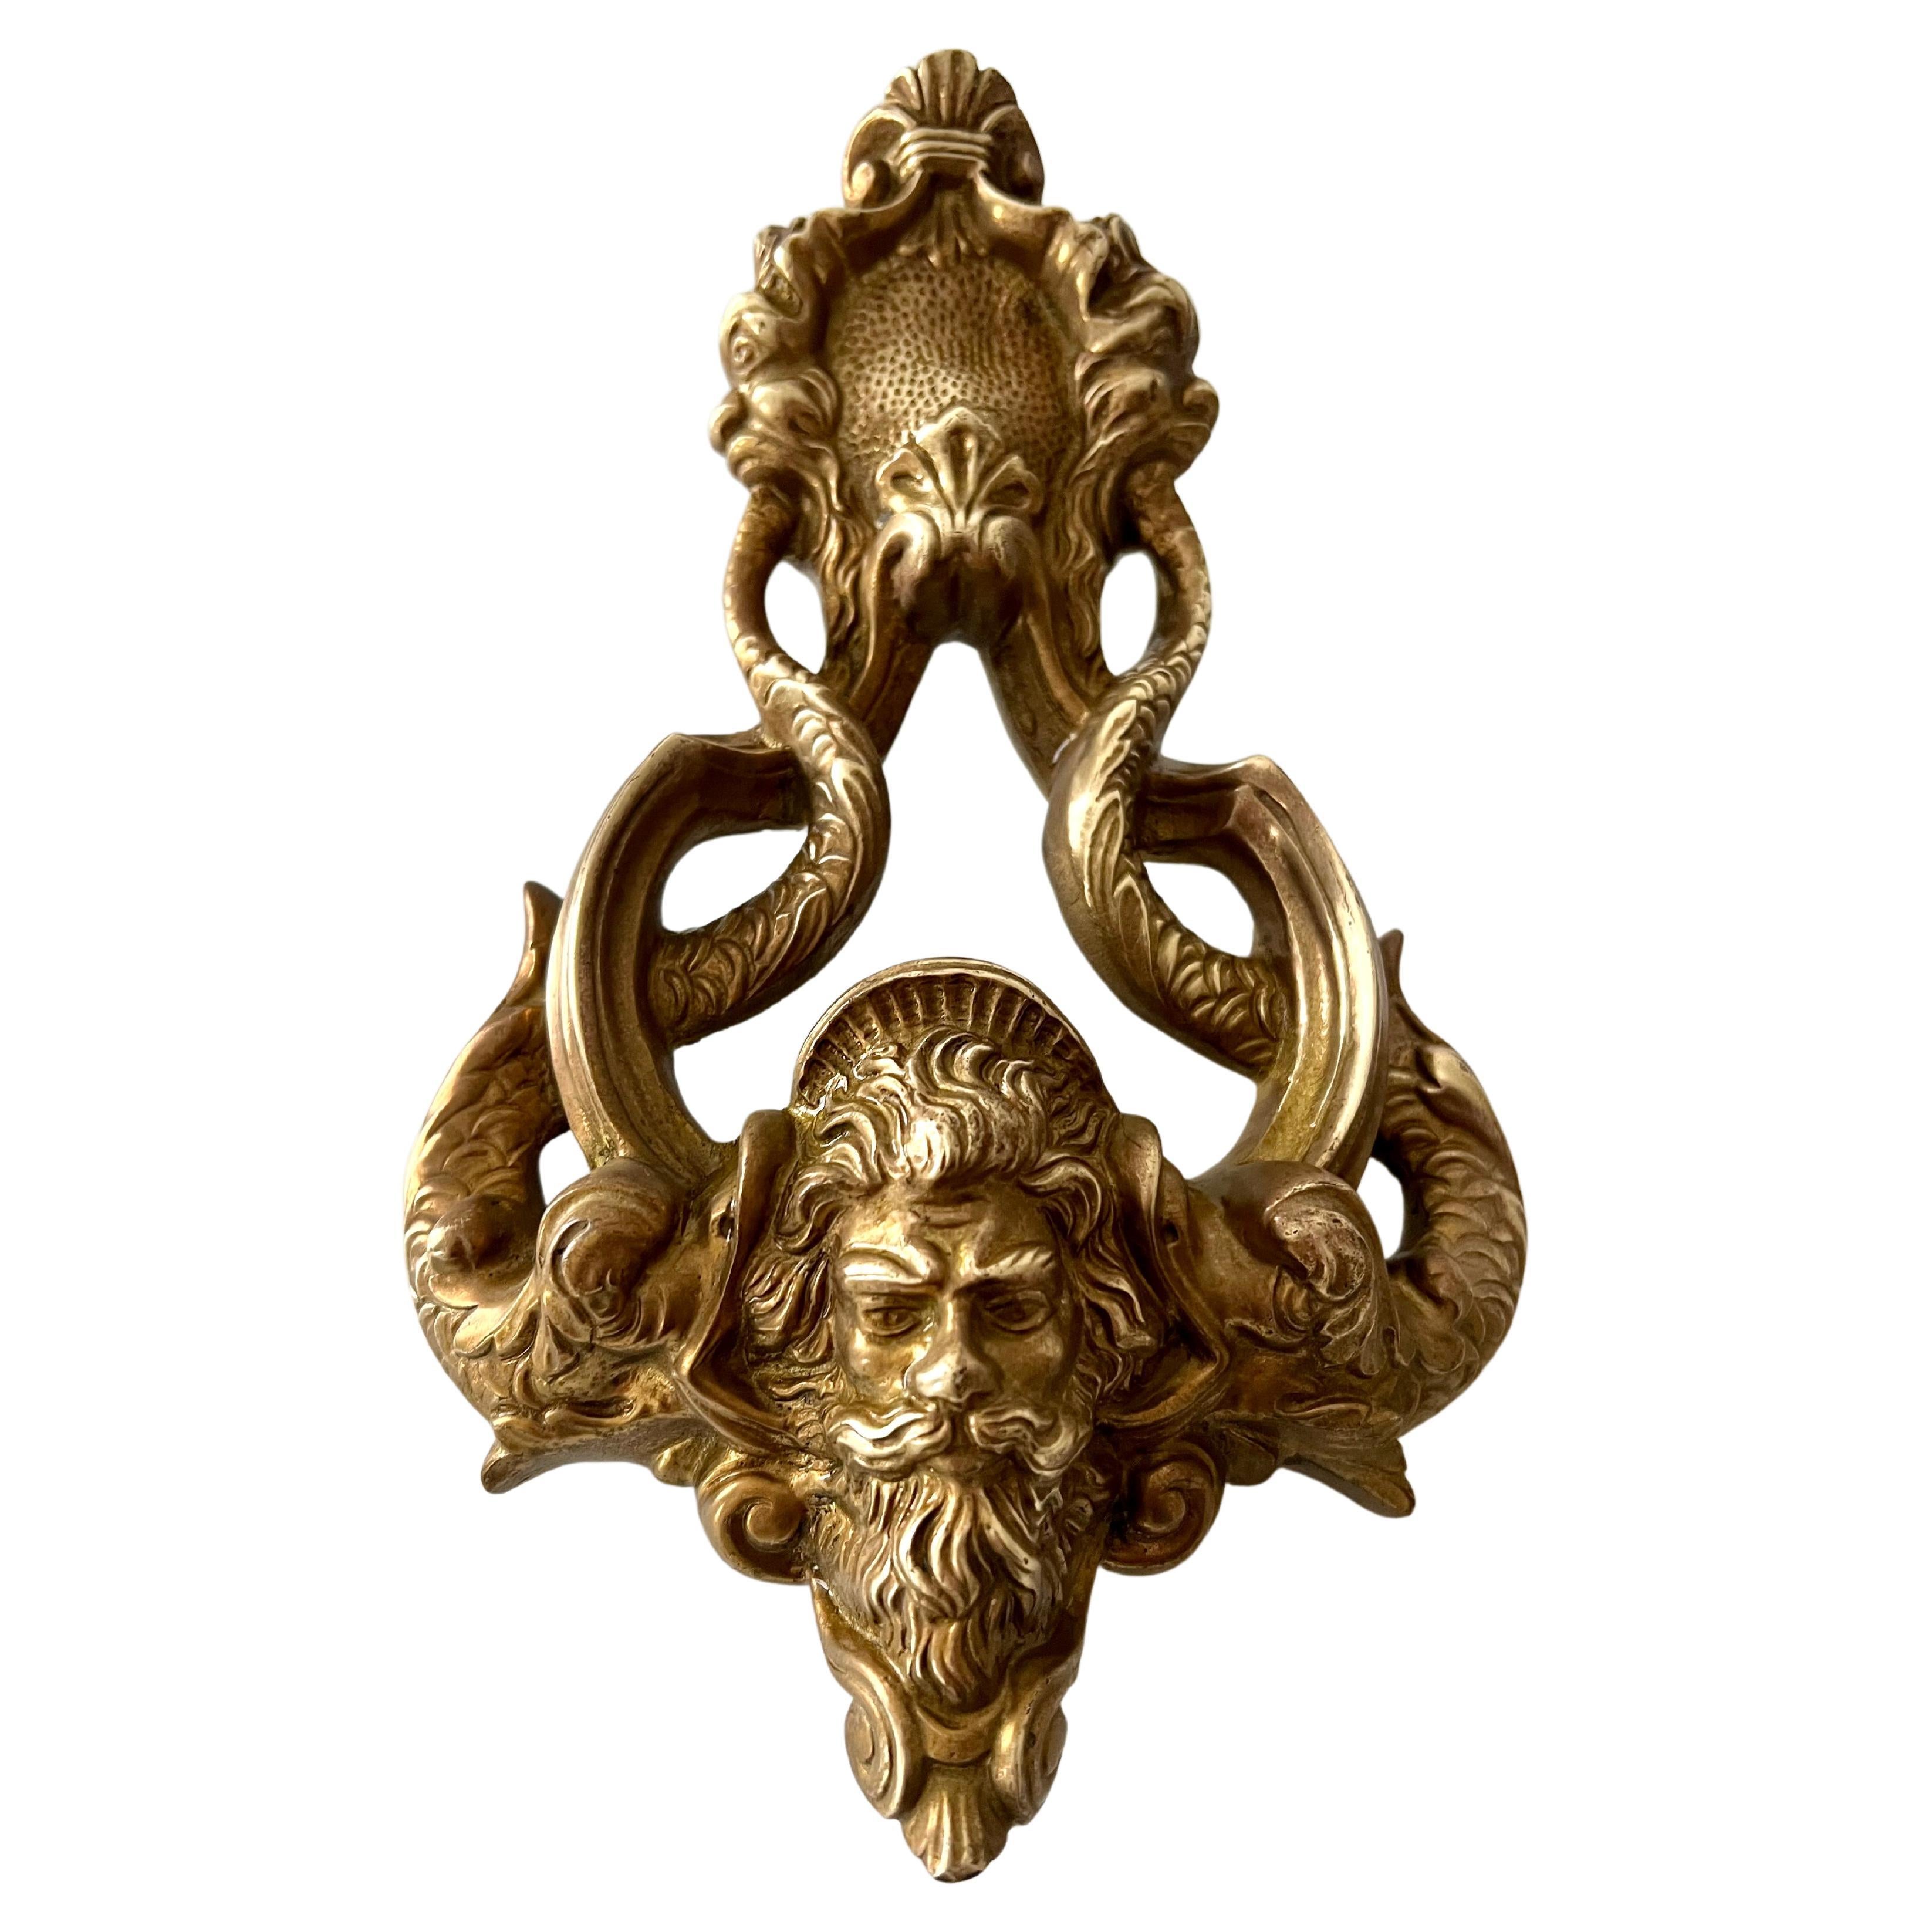 Solid Brass Spanish Door Knocker with Zeus and Dolphins Intertwined